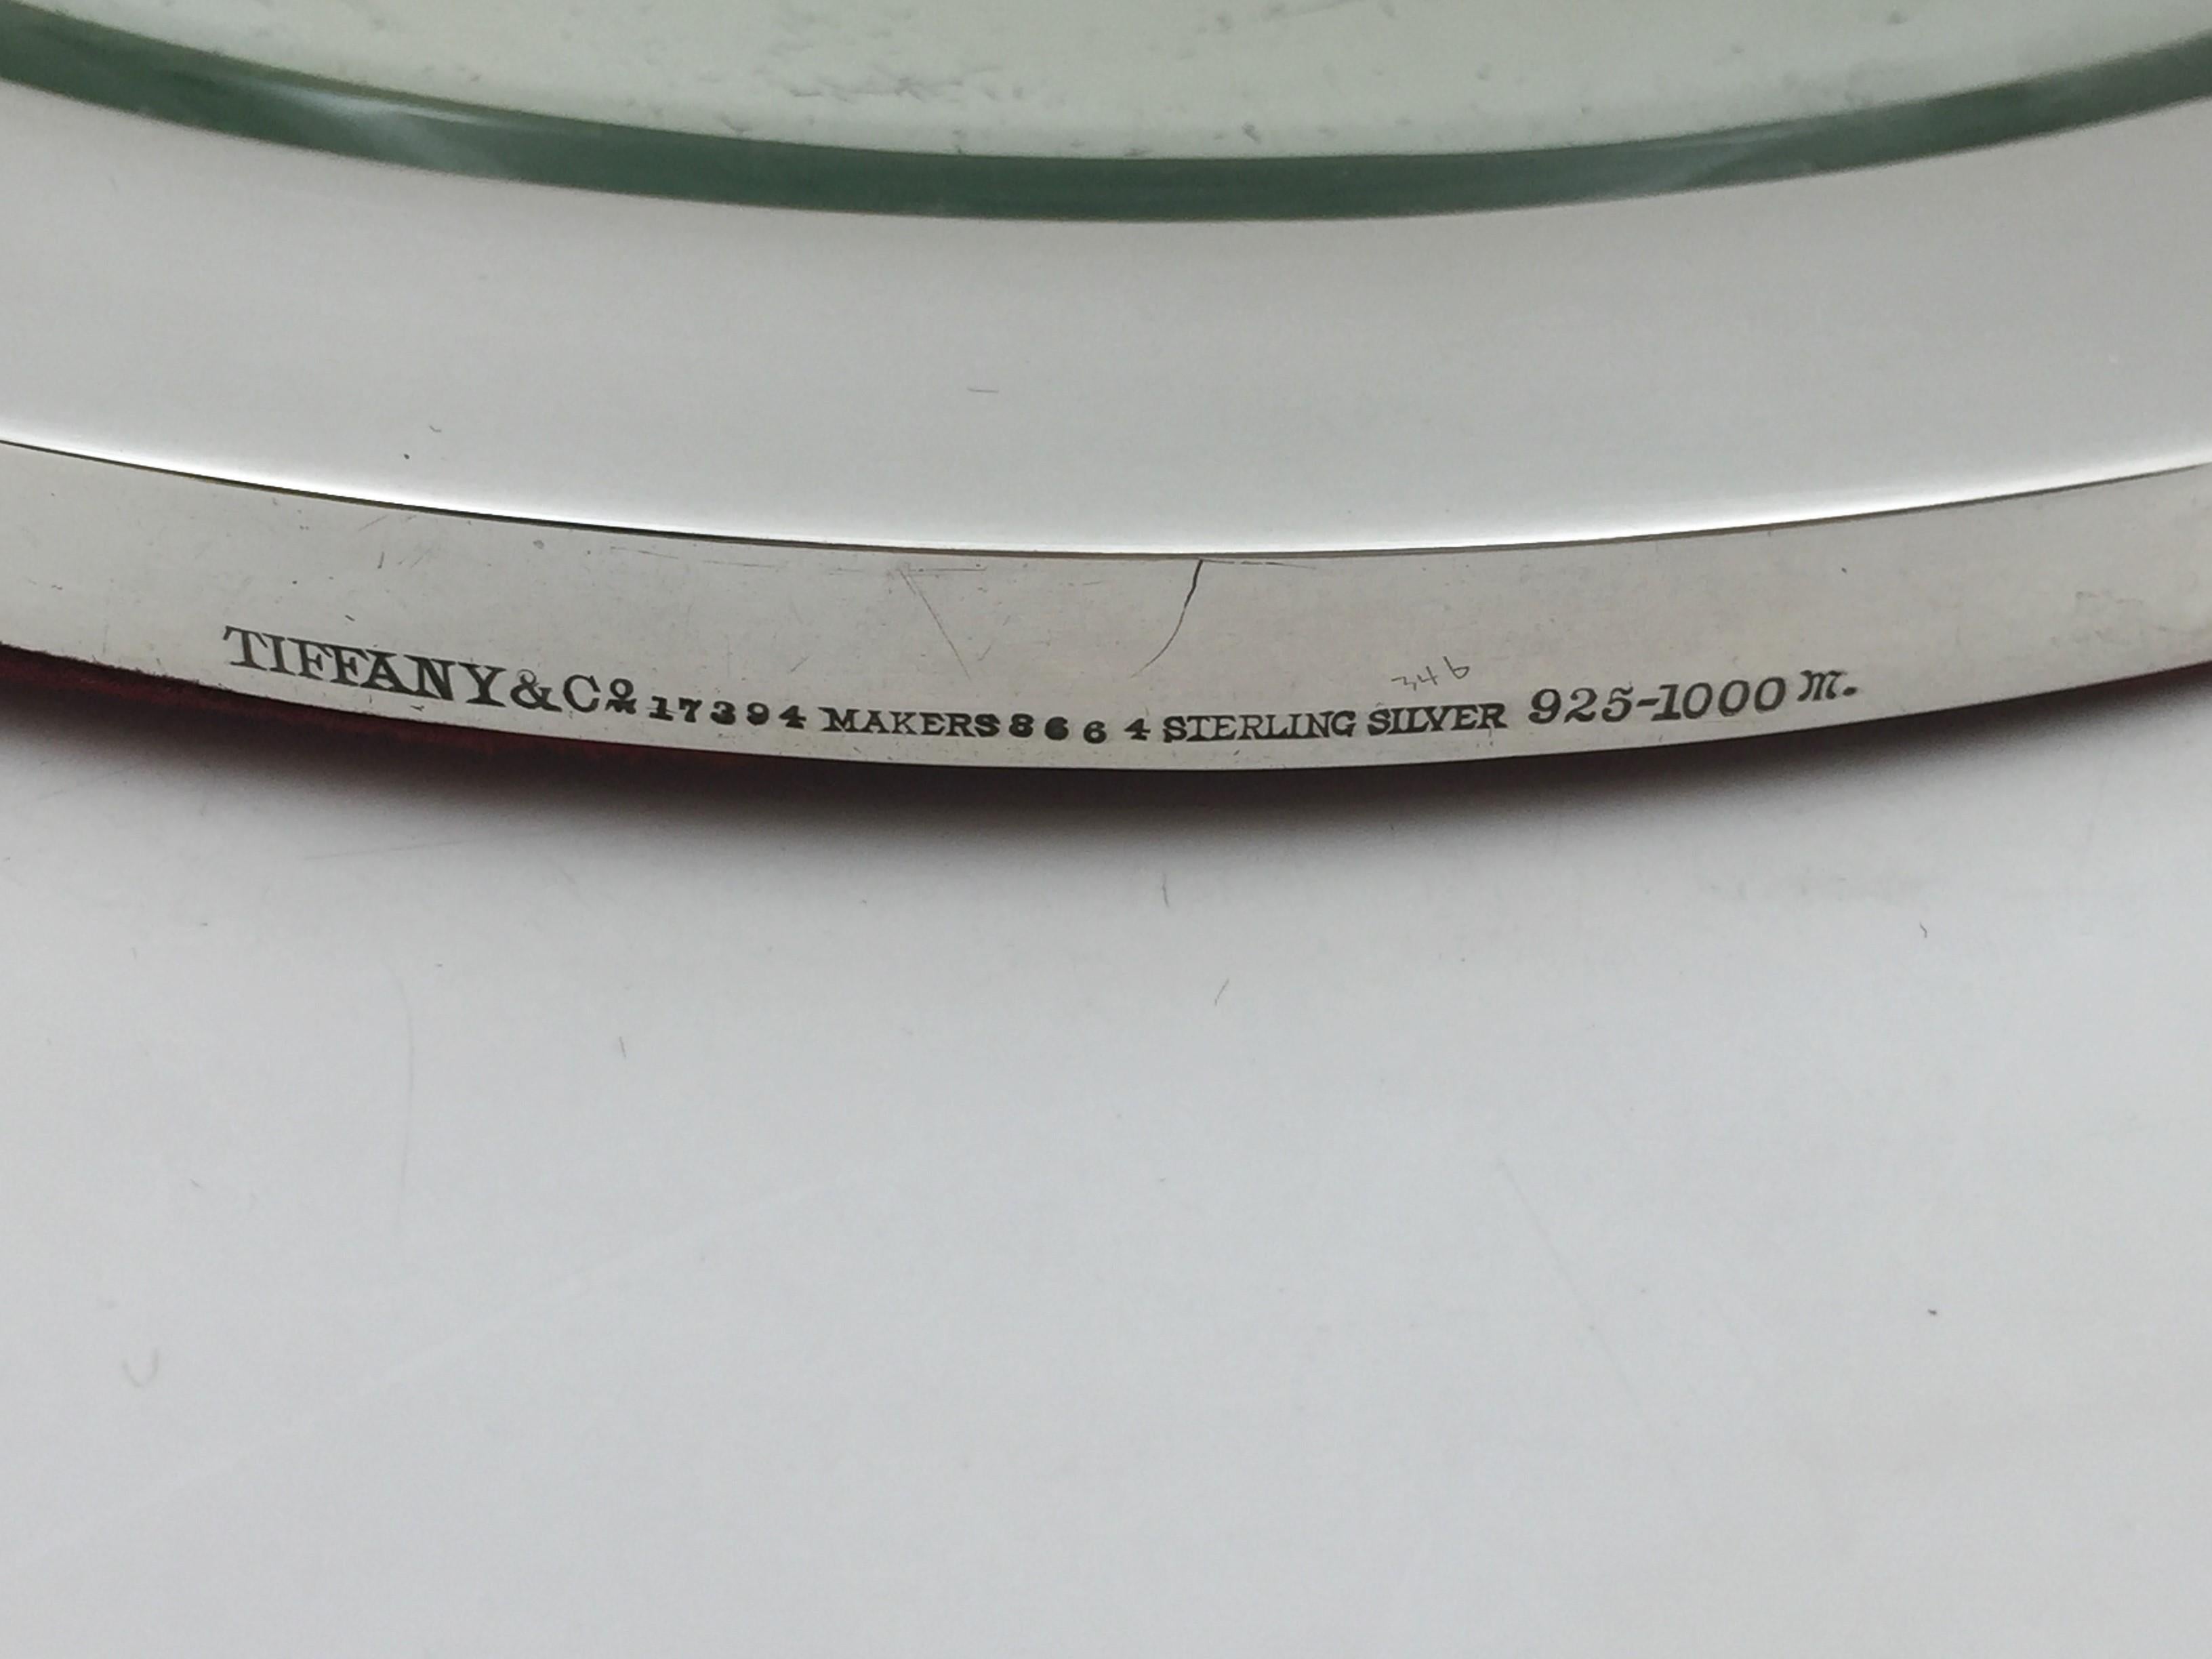 Tiffany & Co. 1909 Sterling Silver Mirrored Platter in Art Deco Style For Sale 1